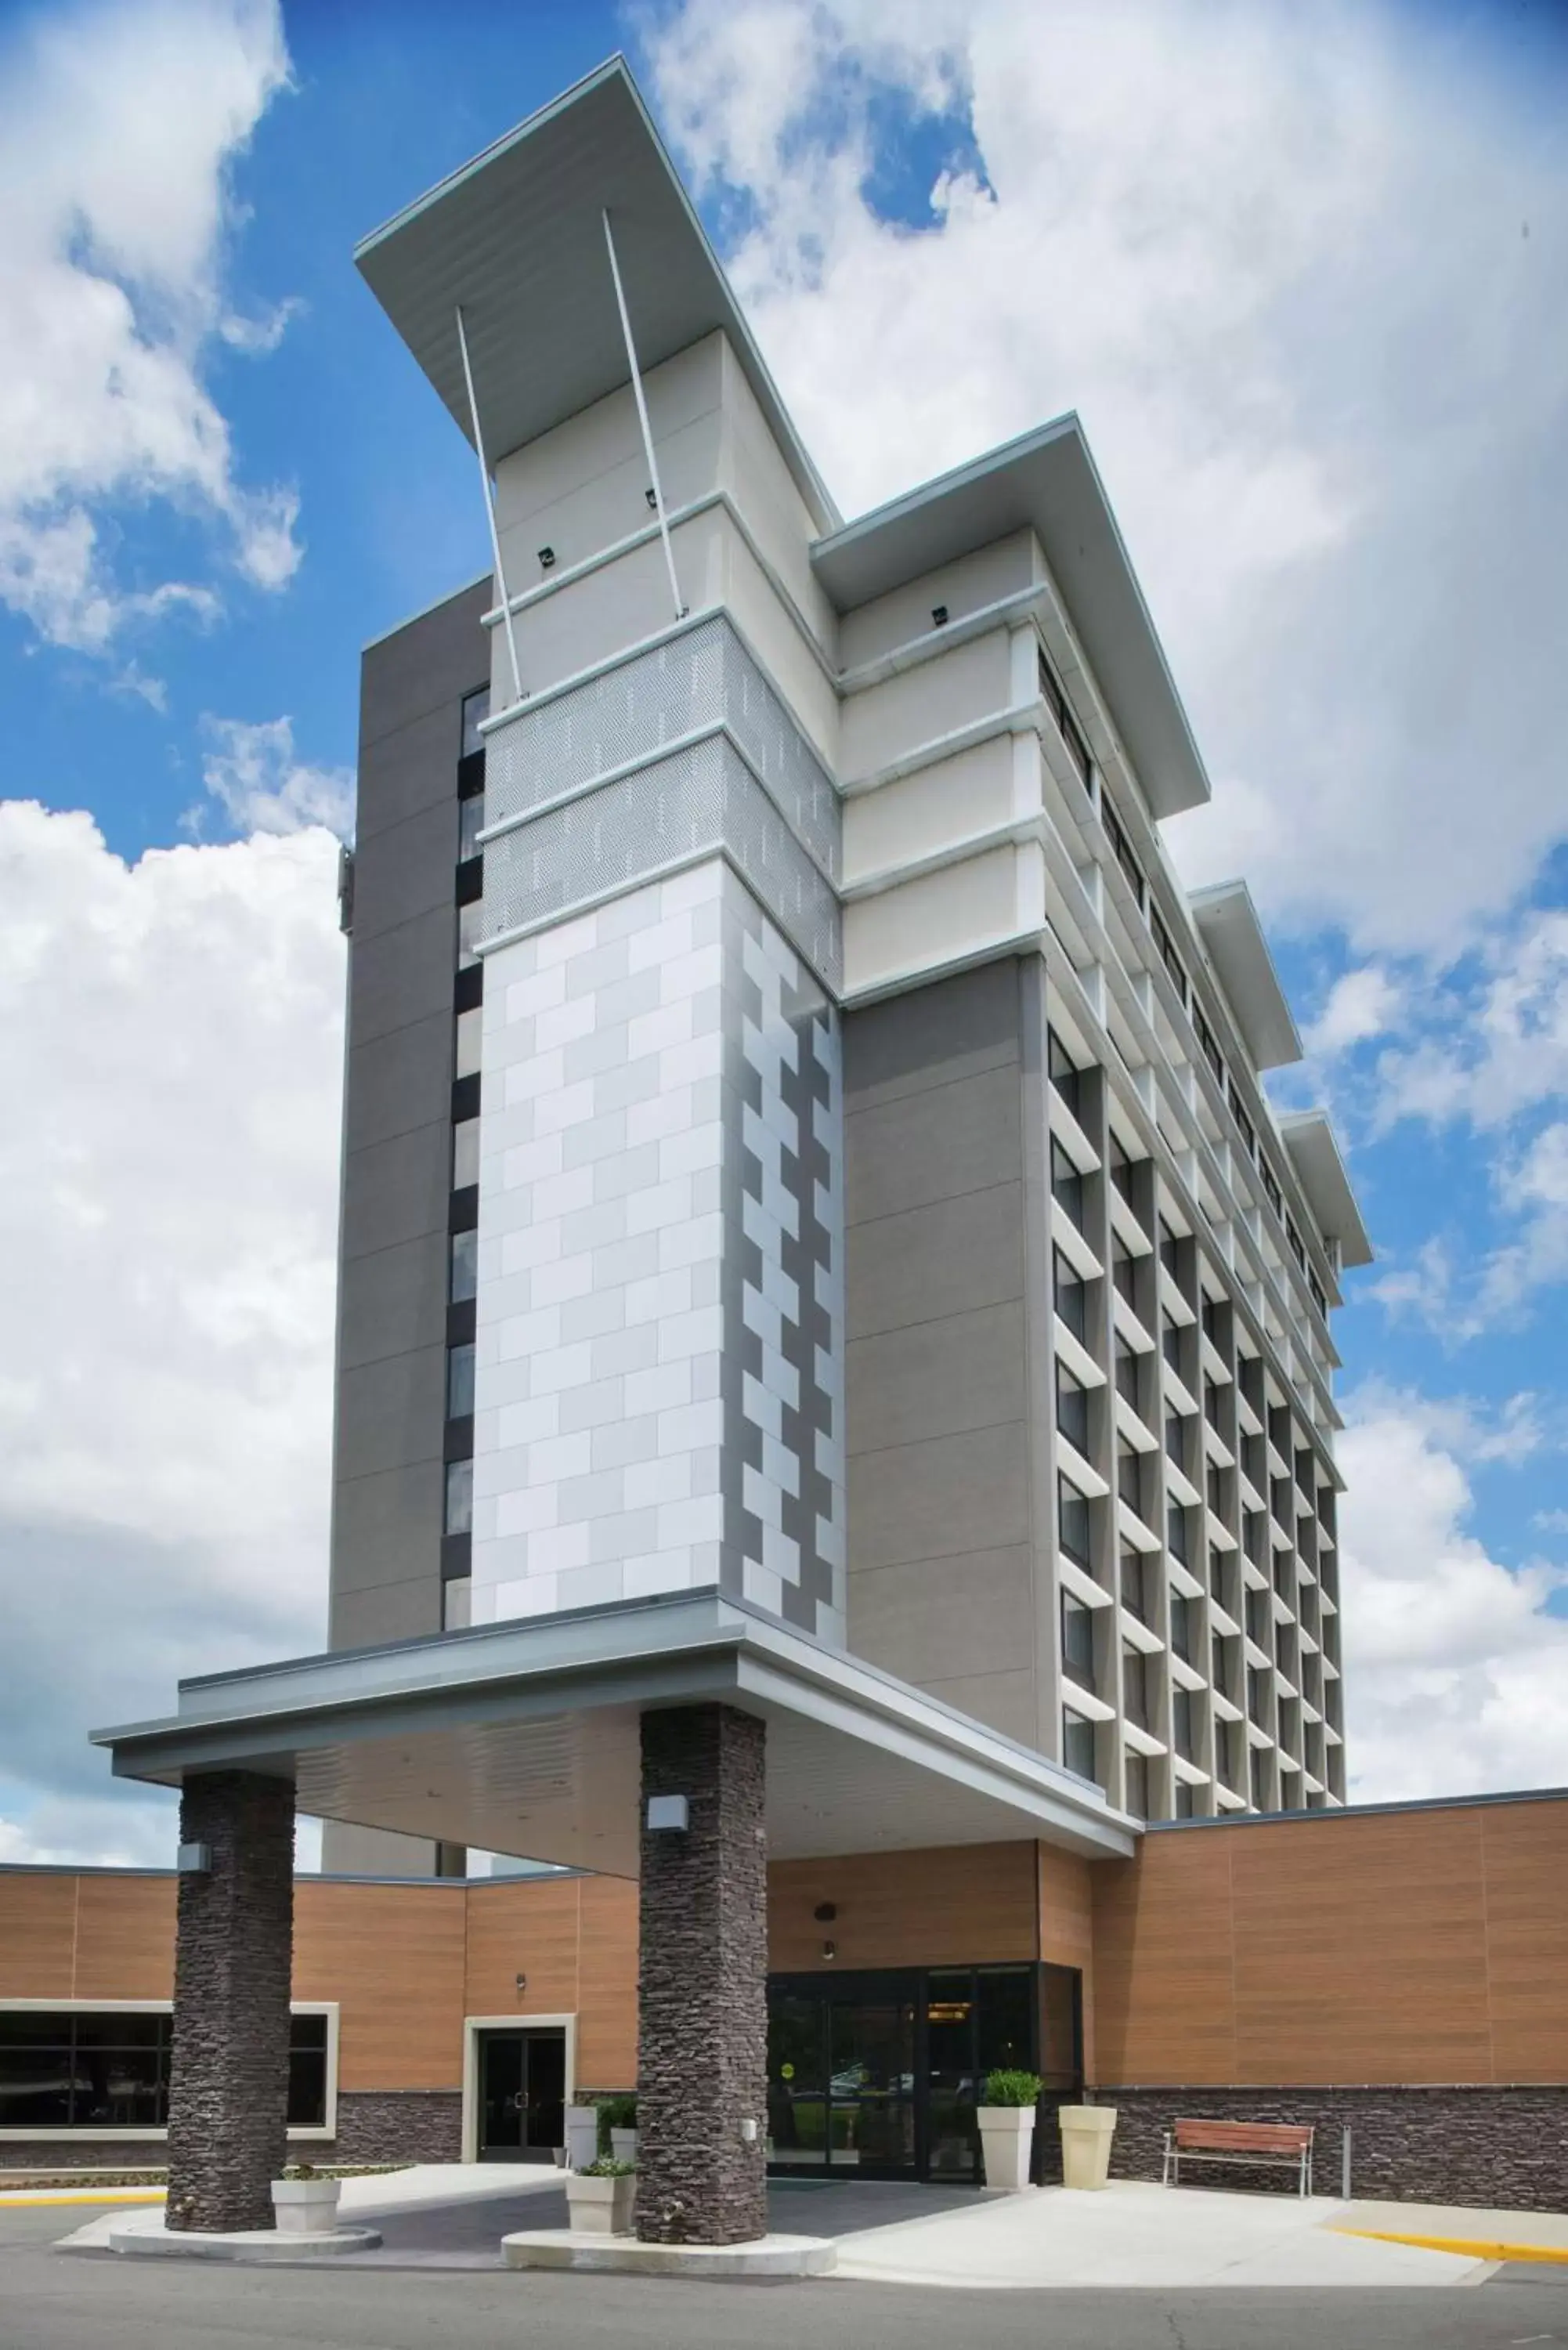 Property Building in Doubletree By Hilton Raleigh Crabtree Valley